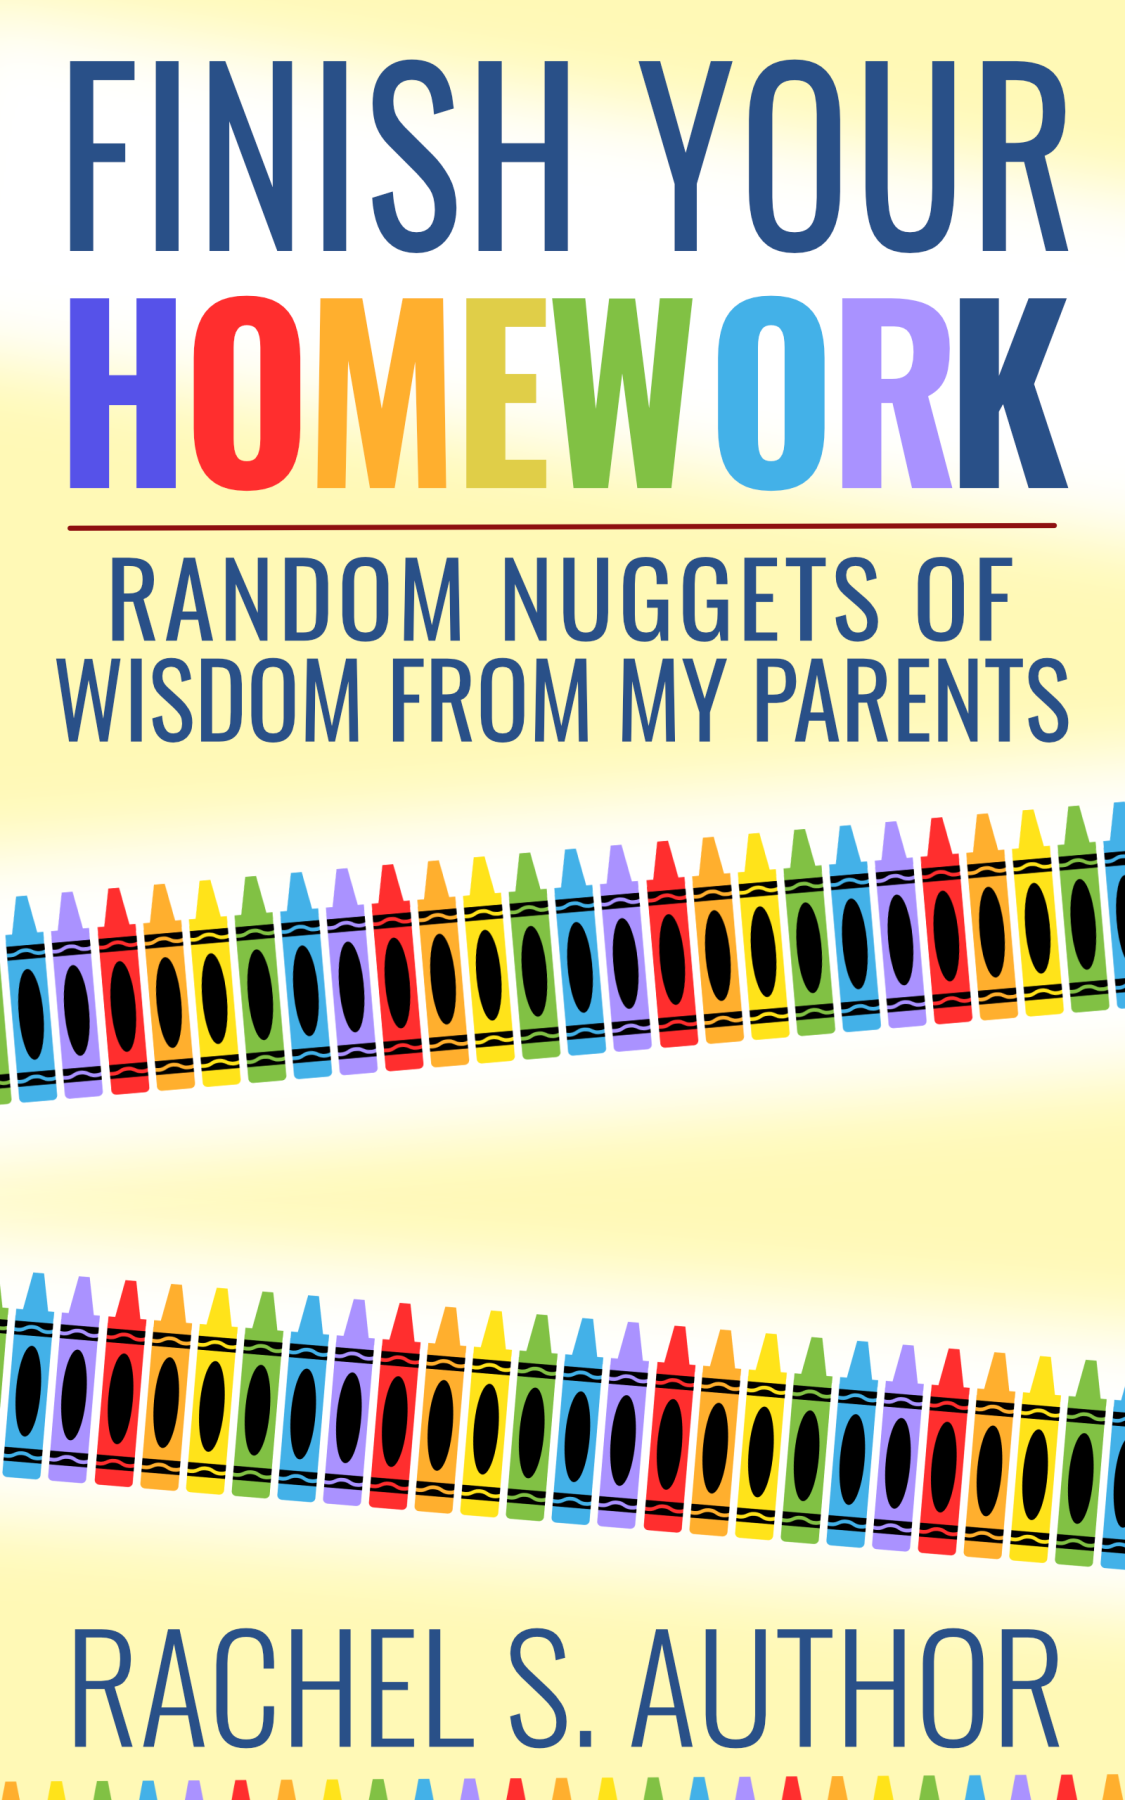 homework book cover pictures